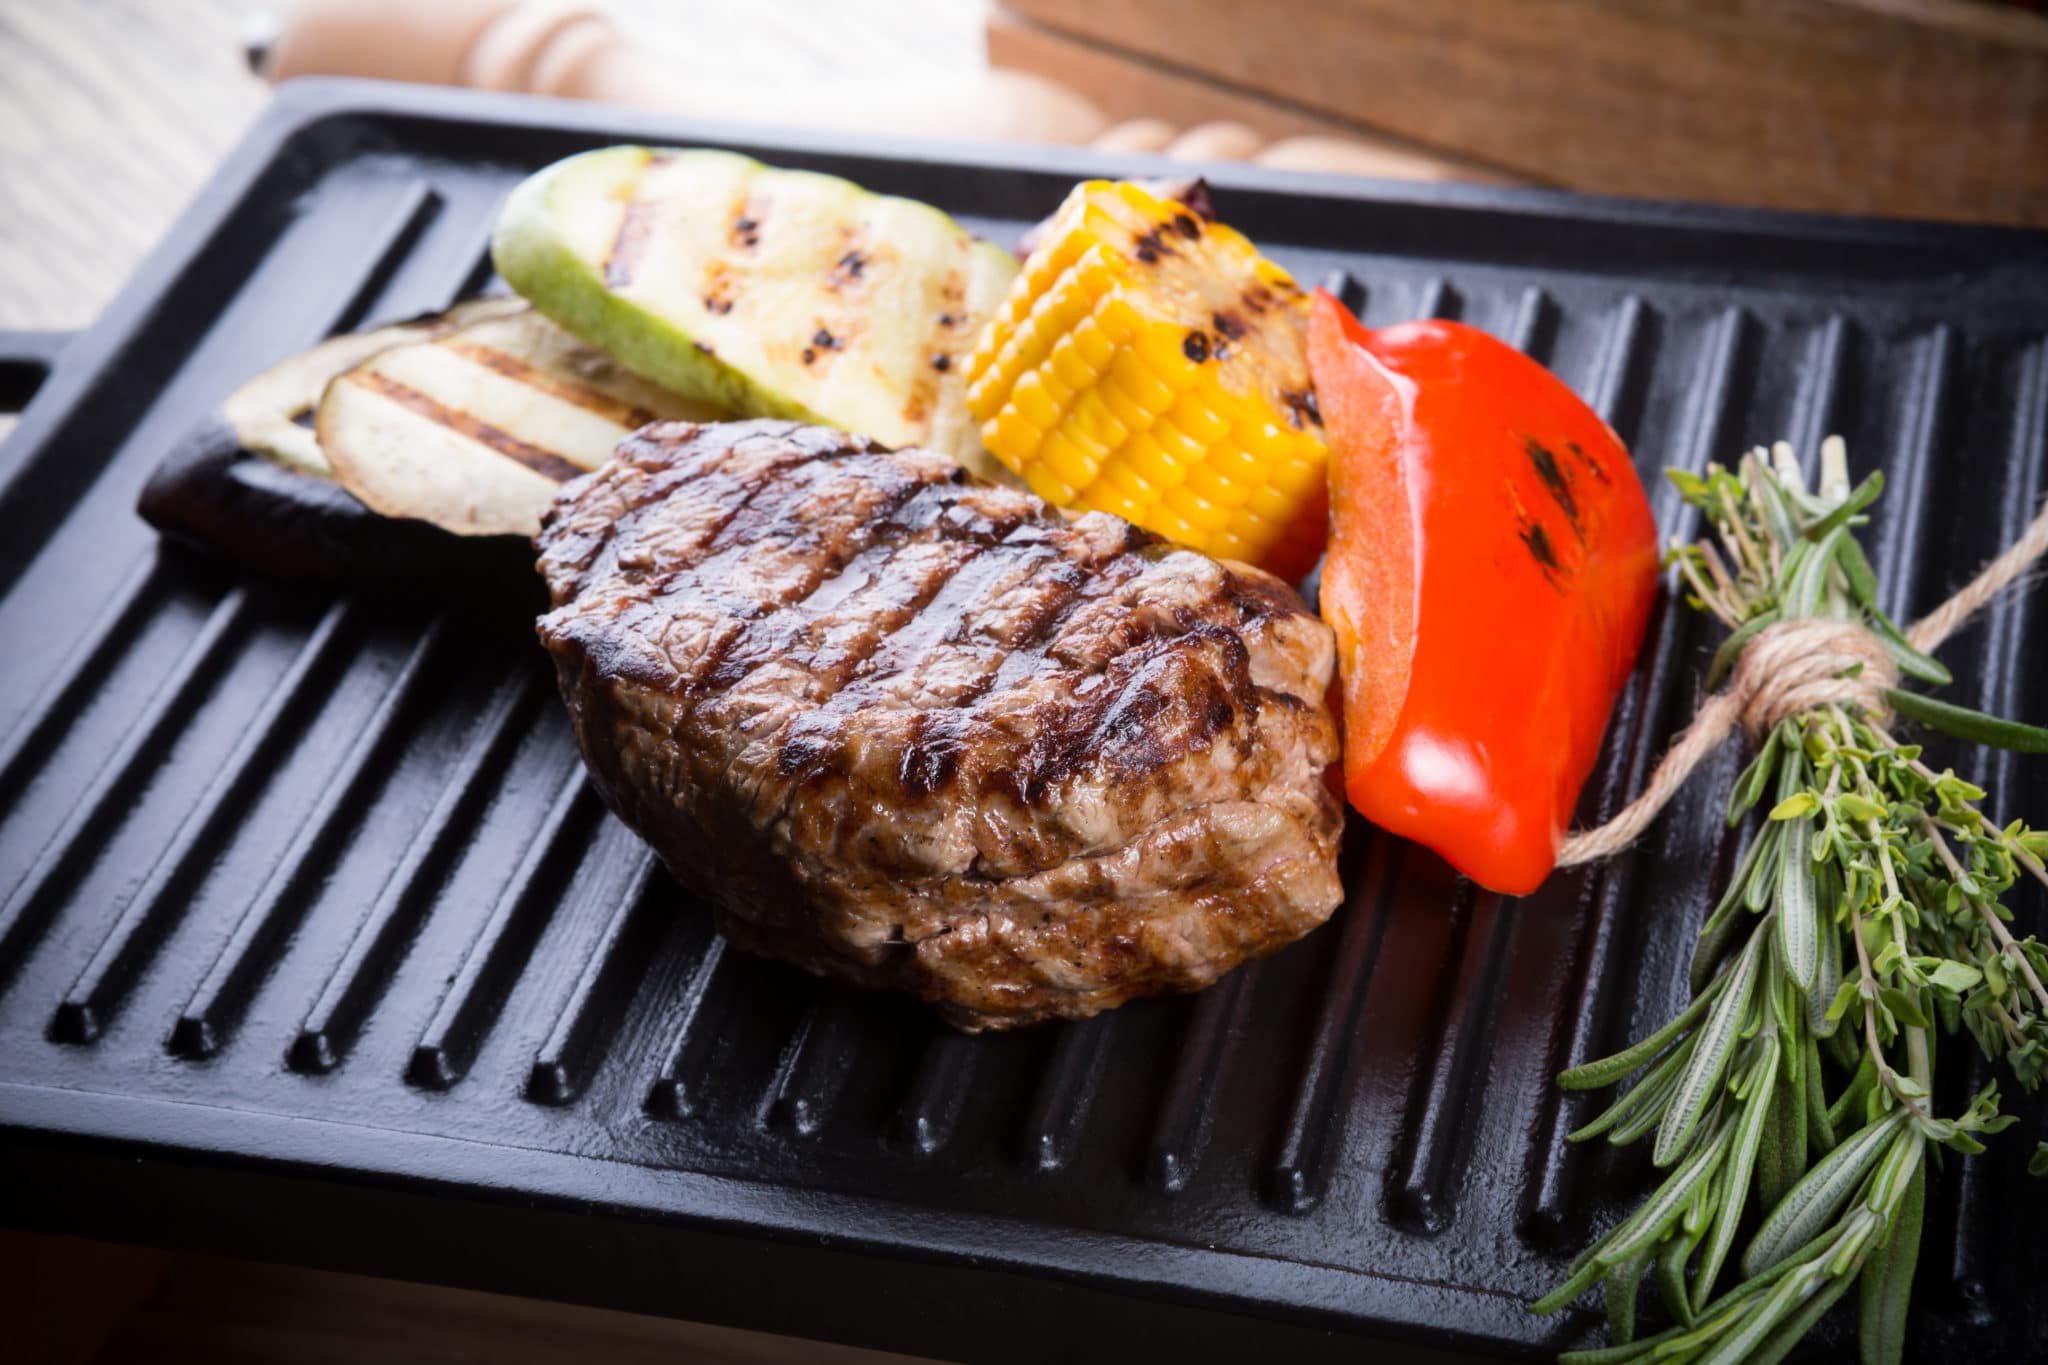 Ready, Set, Grill: Everything You Need To Know About the Electric BBQ